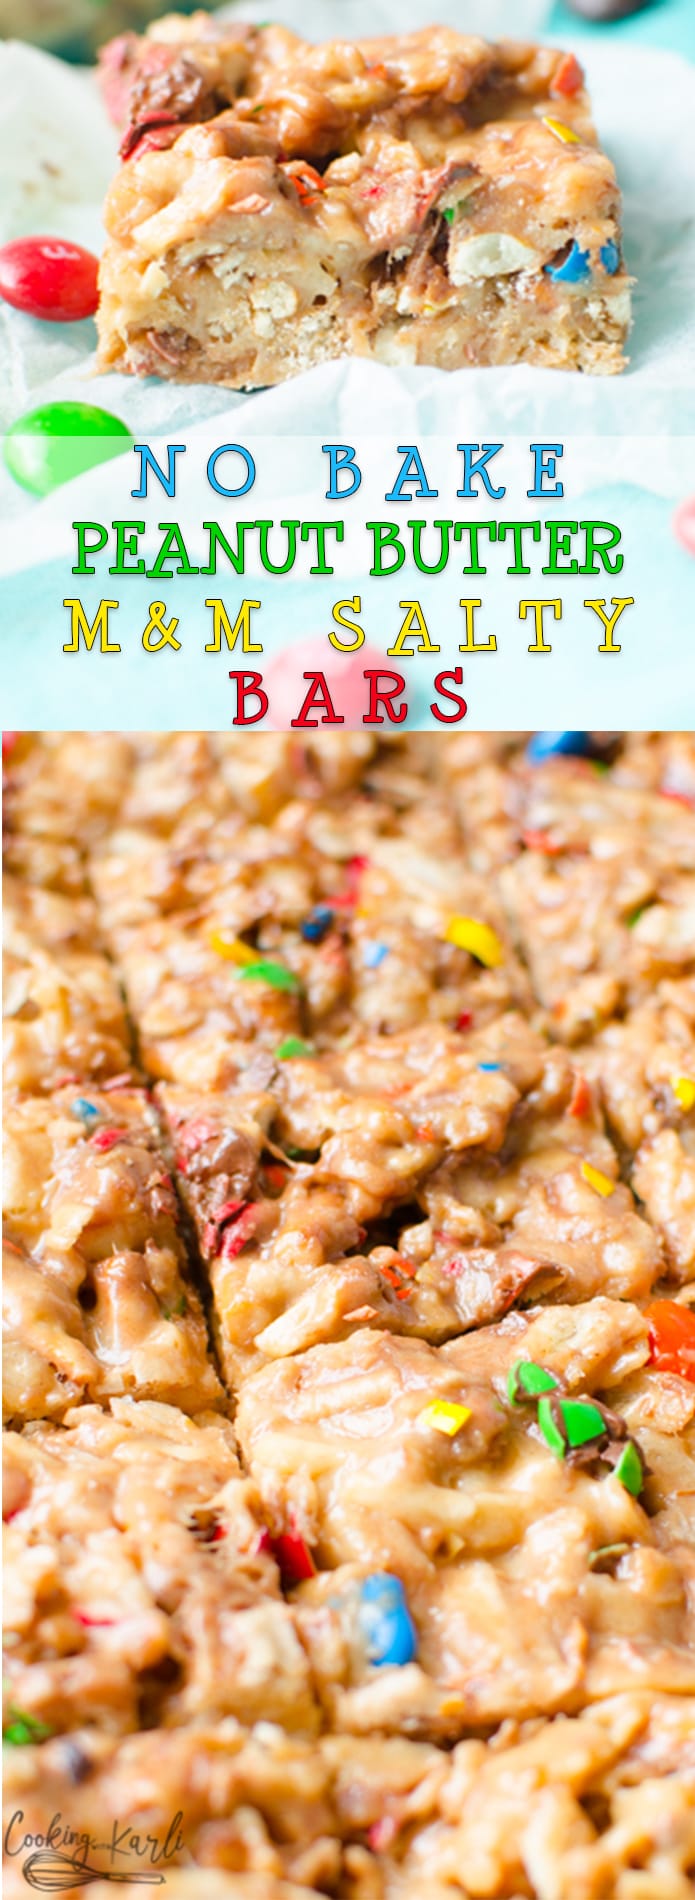 No Bake Peanut Butter Salty Bars are the perfect salty and sweet treat. Potato chips, pretzels, marshmallows, M&M's,  are held together with a sweet, peanut butter coating. These are a salty play on Scotcharoos, the classic peanut butter, chocolate and butterscotch rice Krispy treat. |Cooking with Karli| #nobake #peanutbutter #bars #salty #sweet #dessert #m&m #recipe